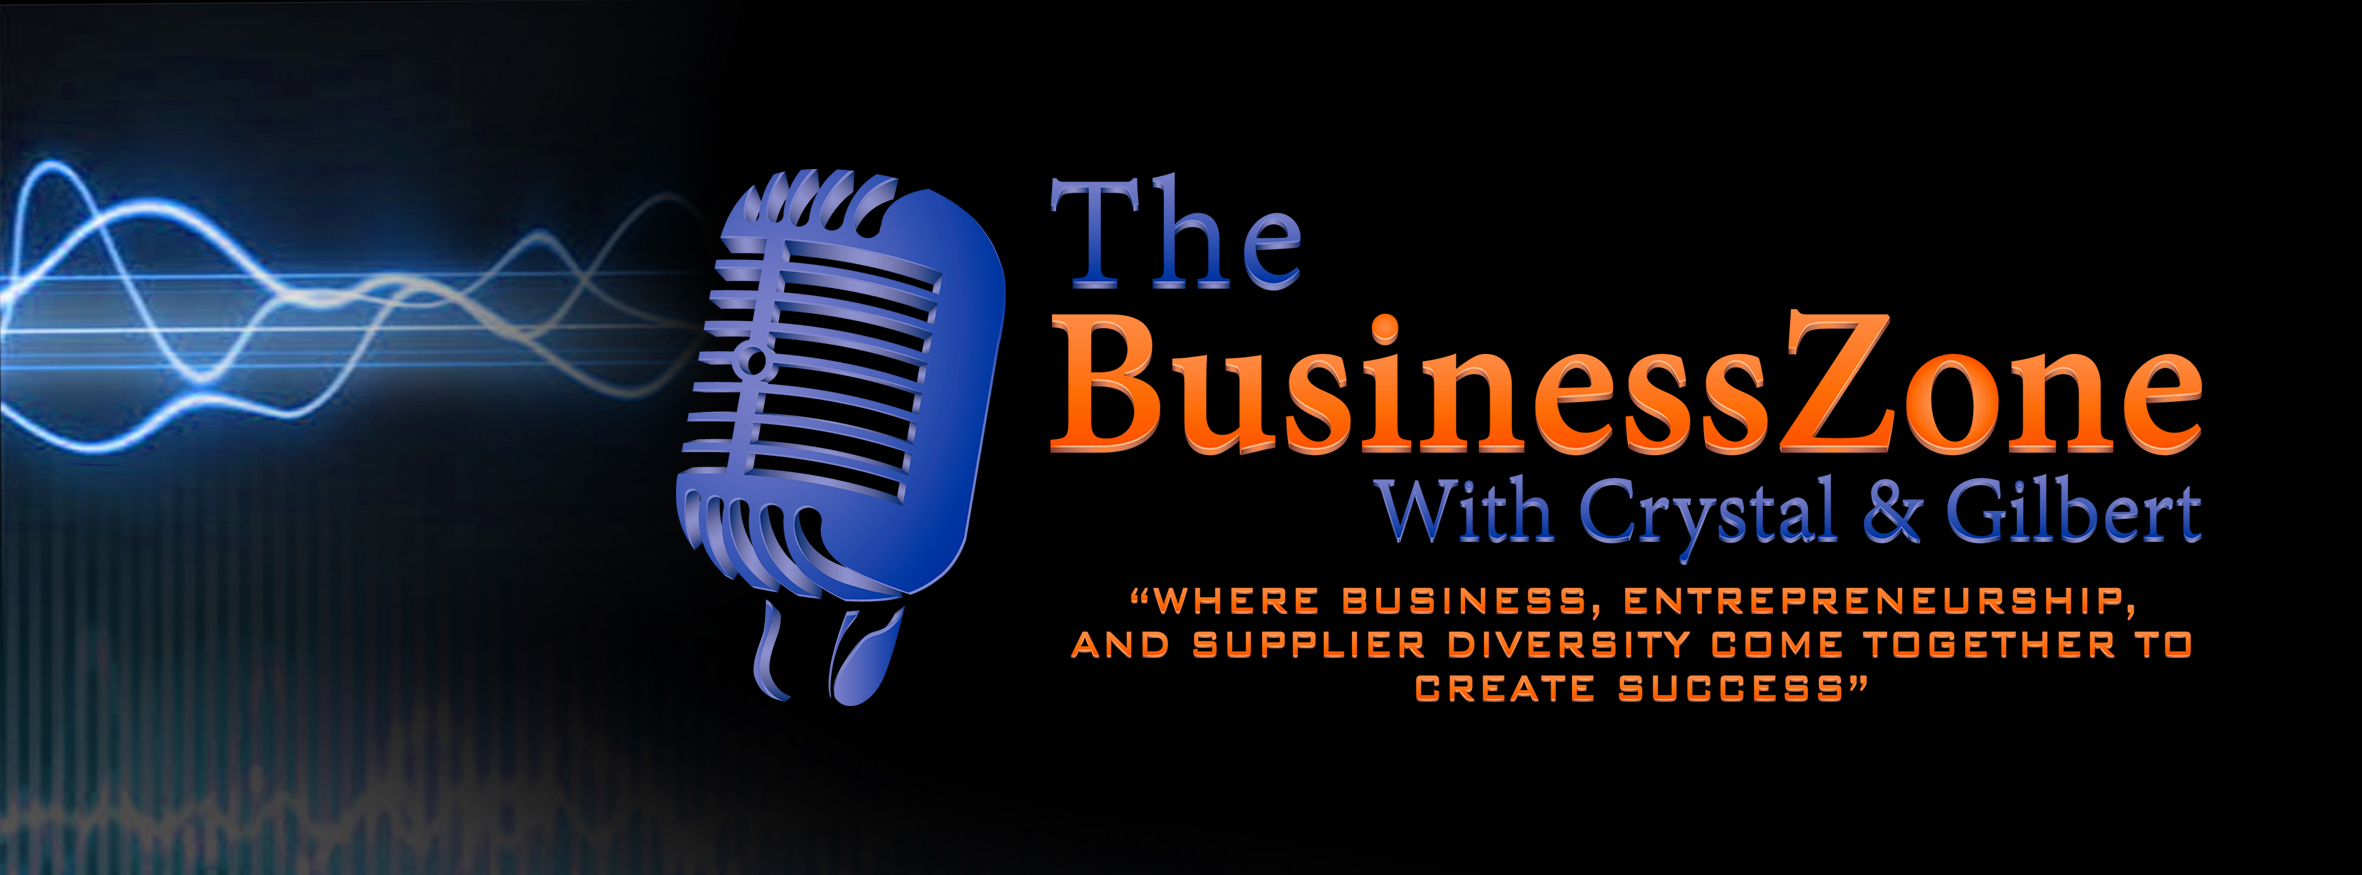 The Business Zone - WOMEN - RISING STARS IN BUSINESS 11-11-16 